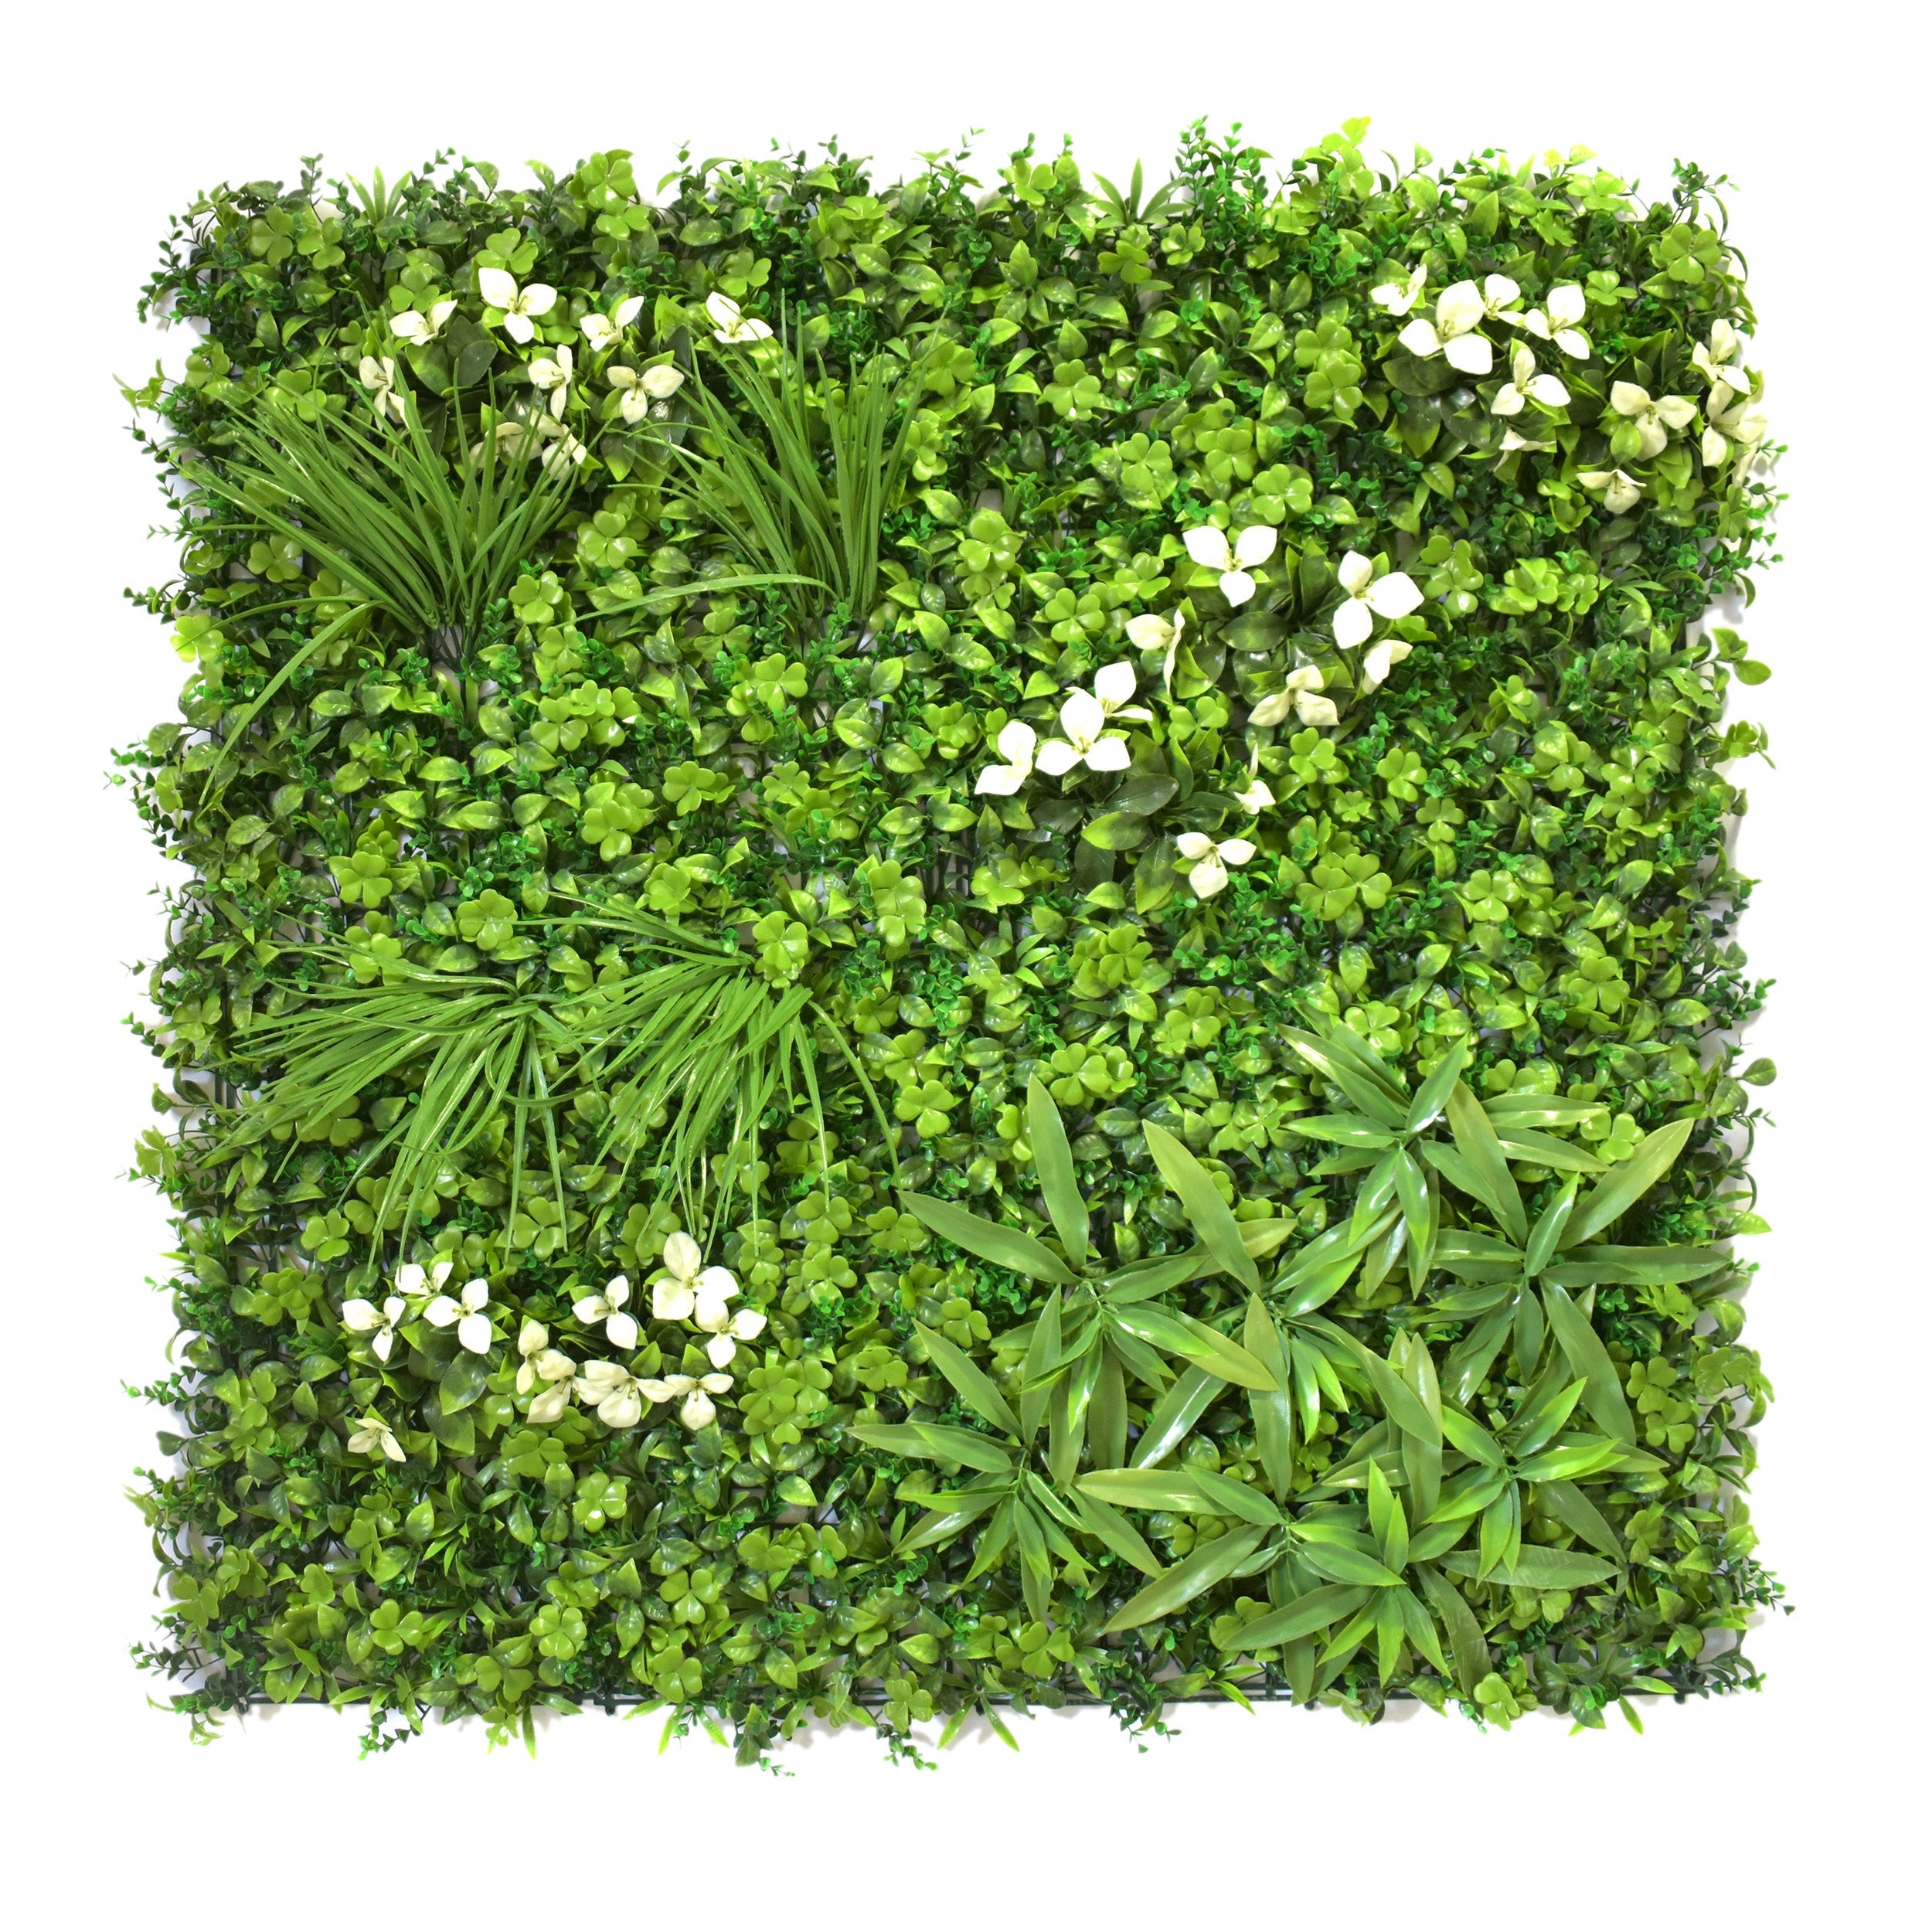 Aavana Greens Artificial Vertical Garden Wall Panel 100X100 CM For Home & Office Decoration 100% UV Indoor And Outdoor Use Option 20